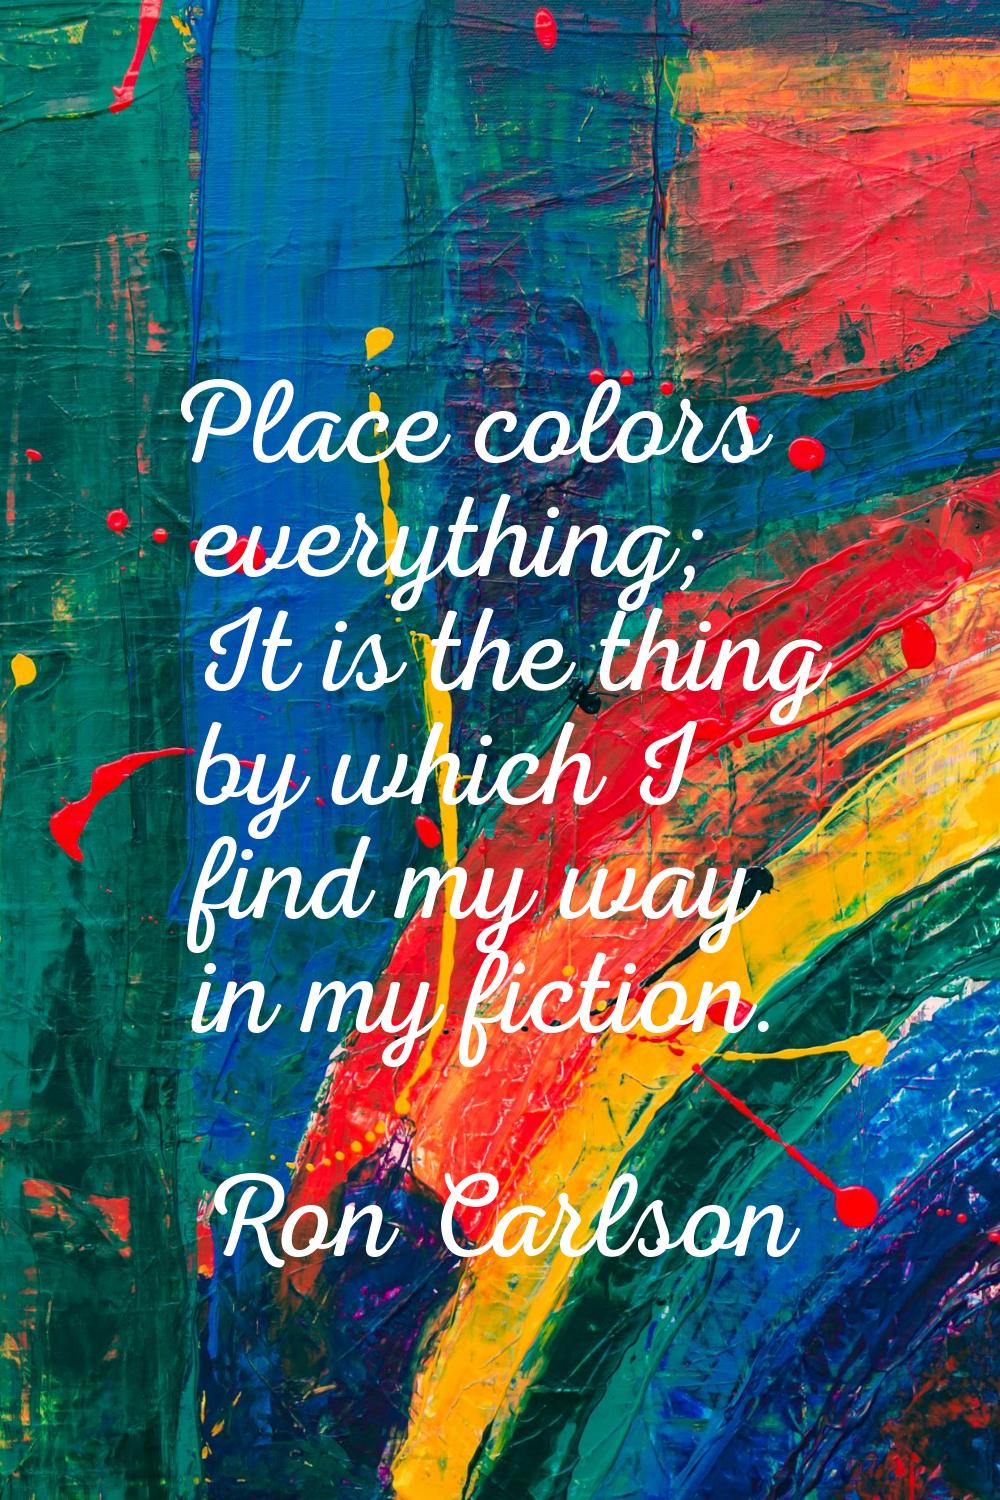 Place colors everything; It is the thing by which I find my way in my fiction.